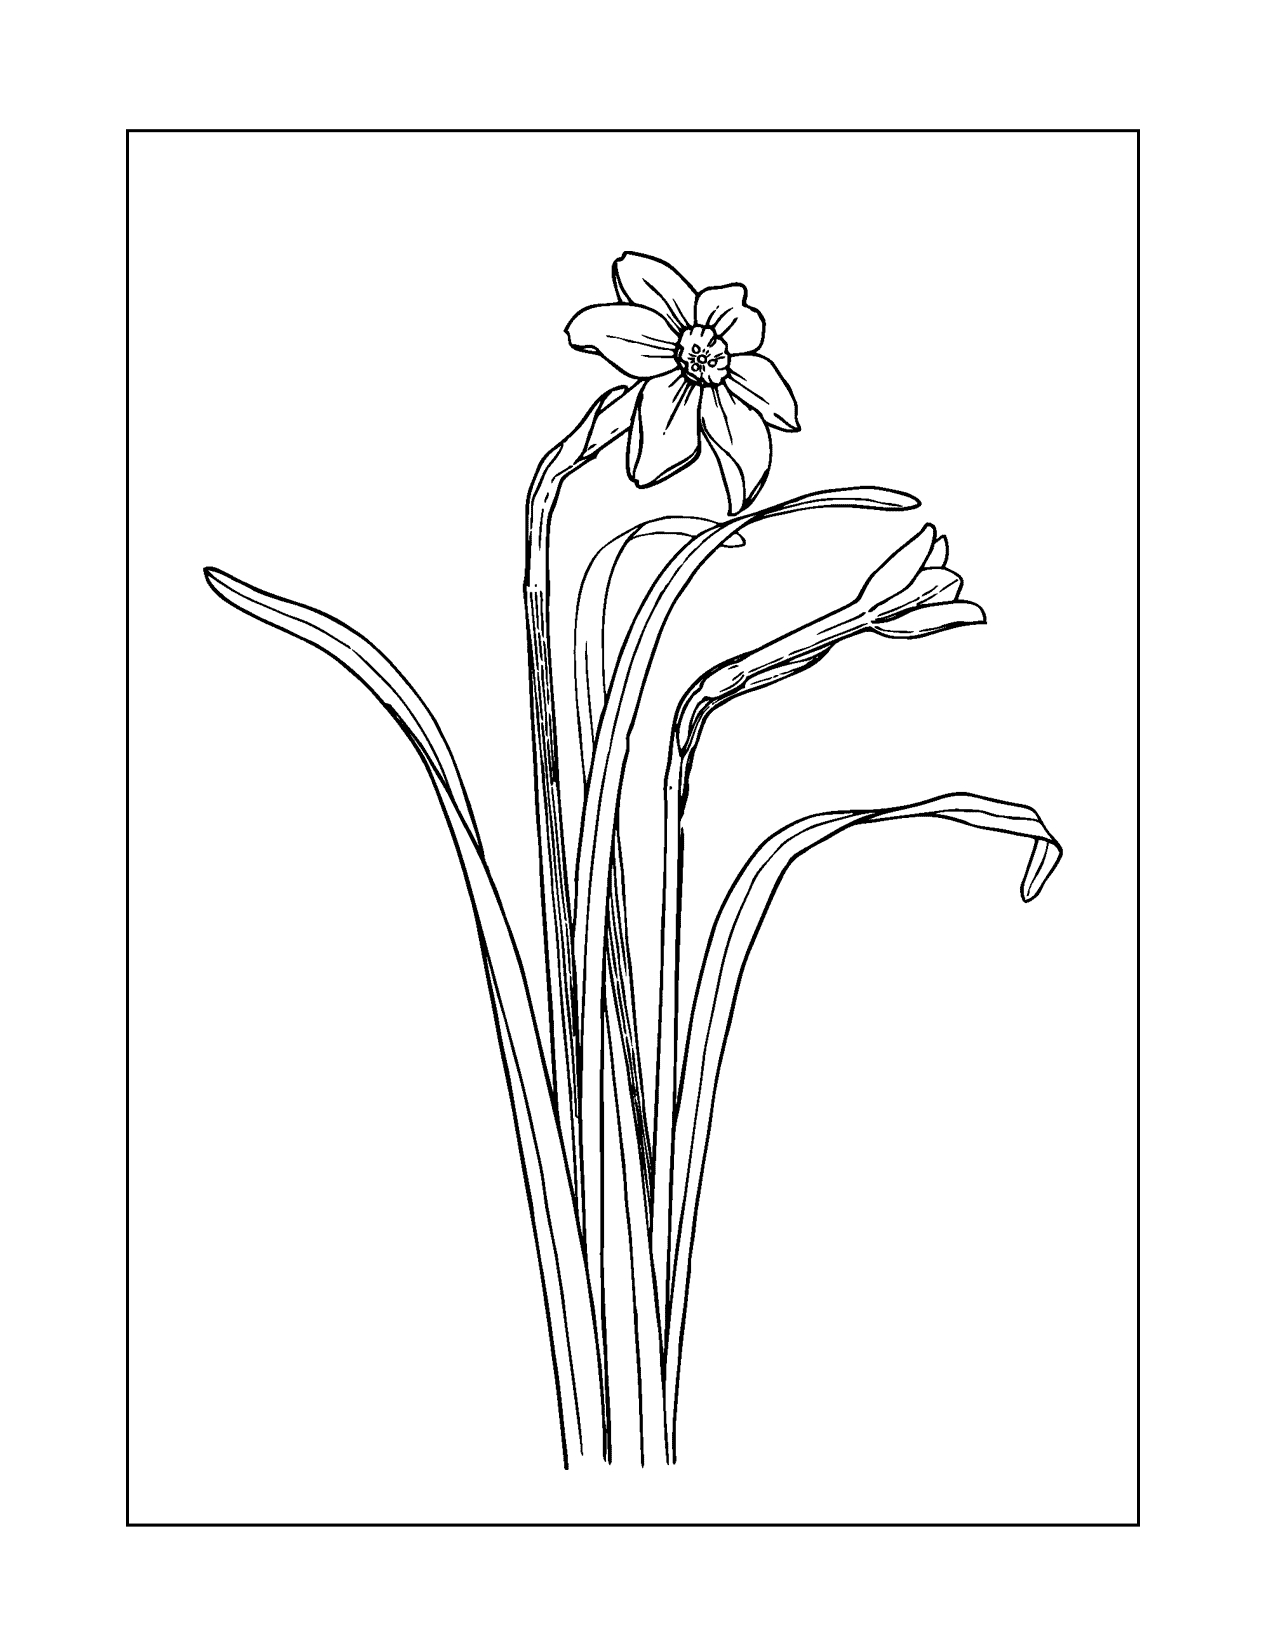 Daffodil Flowers Coloring Pages